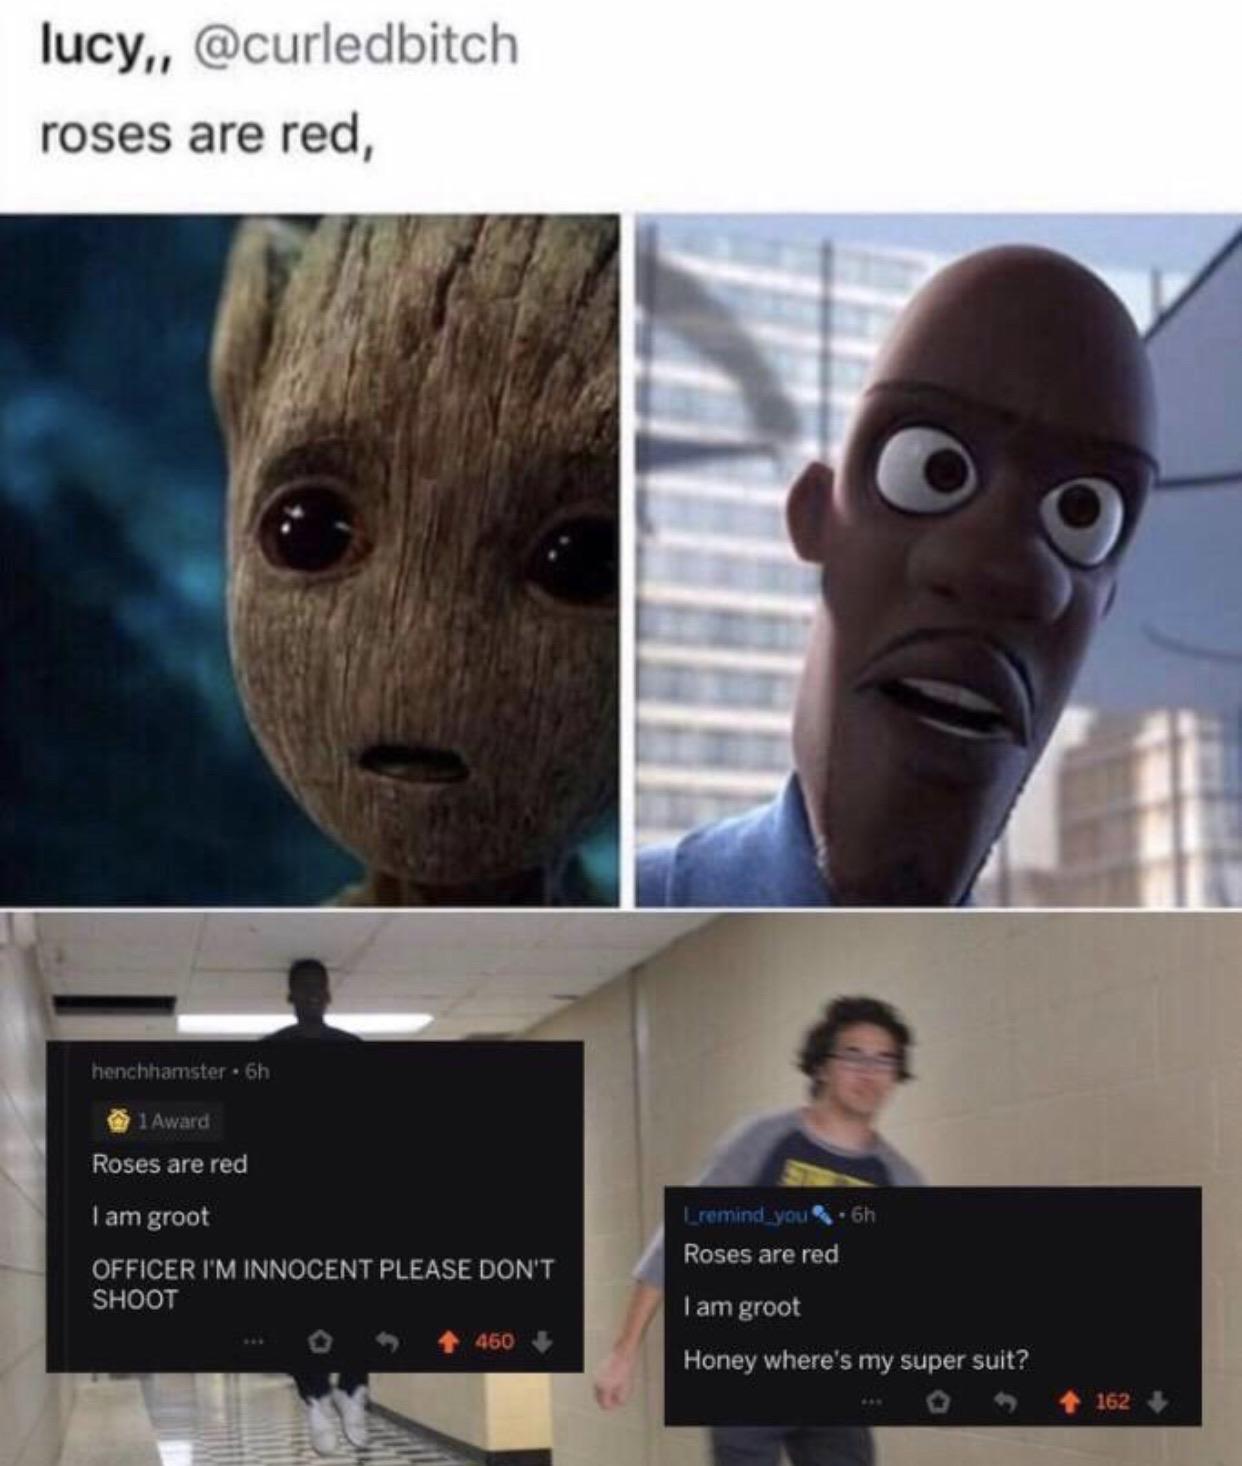 Dank Meme dank-memes cute text: lucy„ @curledbitch roses are red, henchhamster • 6b I Award Roses are red I am groot OFFICER INNOCENT PLEASE DON'T SHOOT 0 9 460 • 6h Roses are red I am groot Honey where's my super suit? 162 